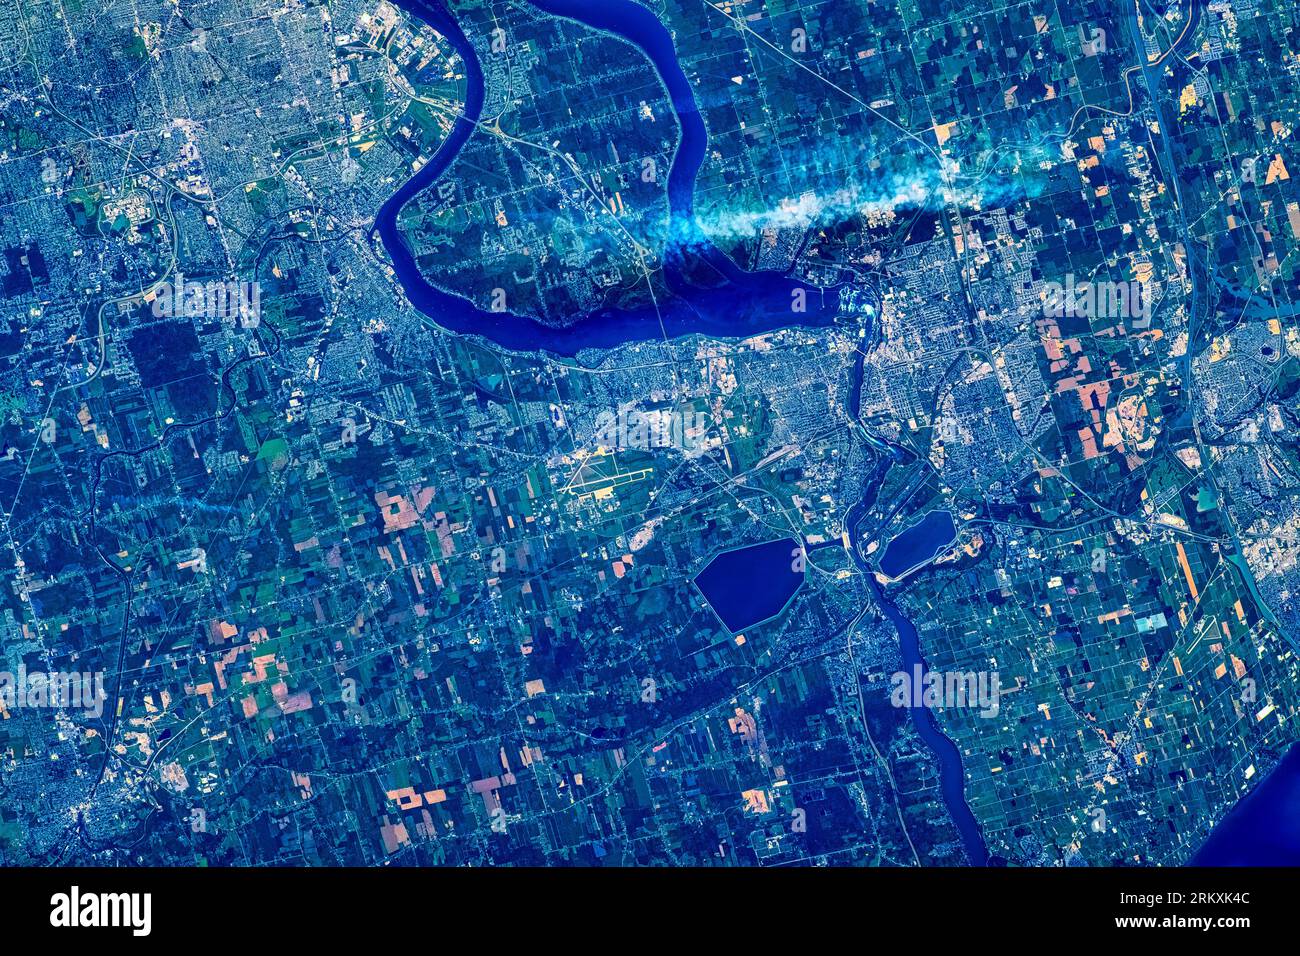 Urban area with rivers passing through the area of the Great Lakes in North America. Digital enhancement of an image by NASA. Stock Photo